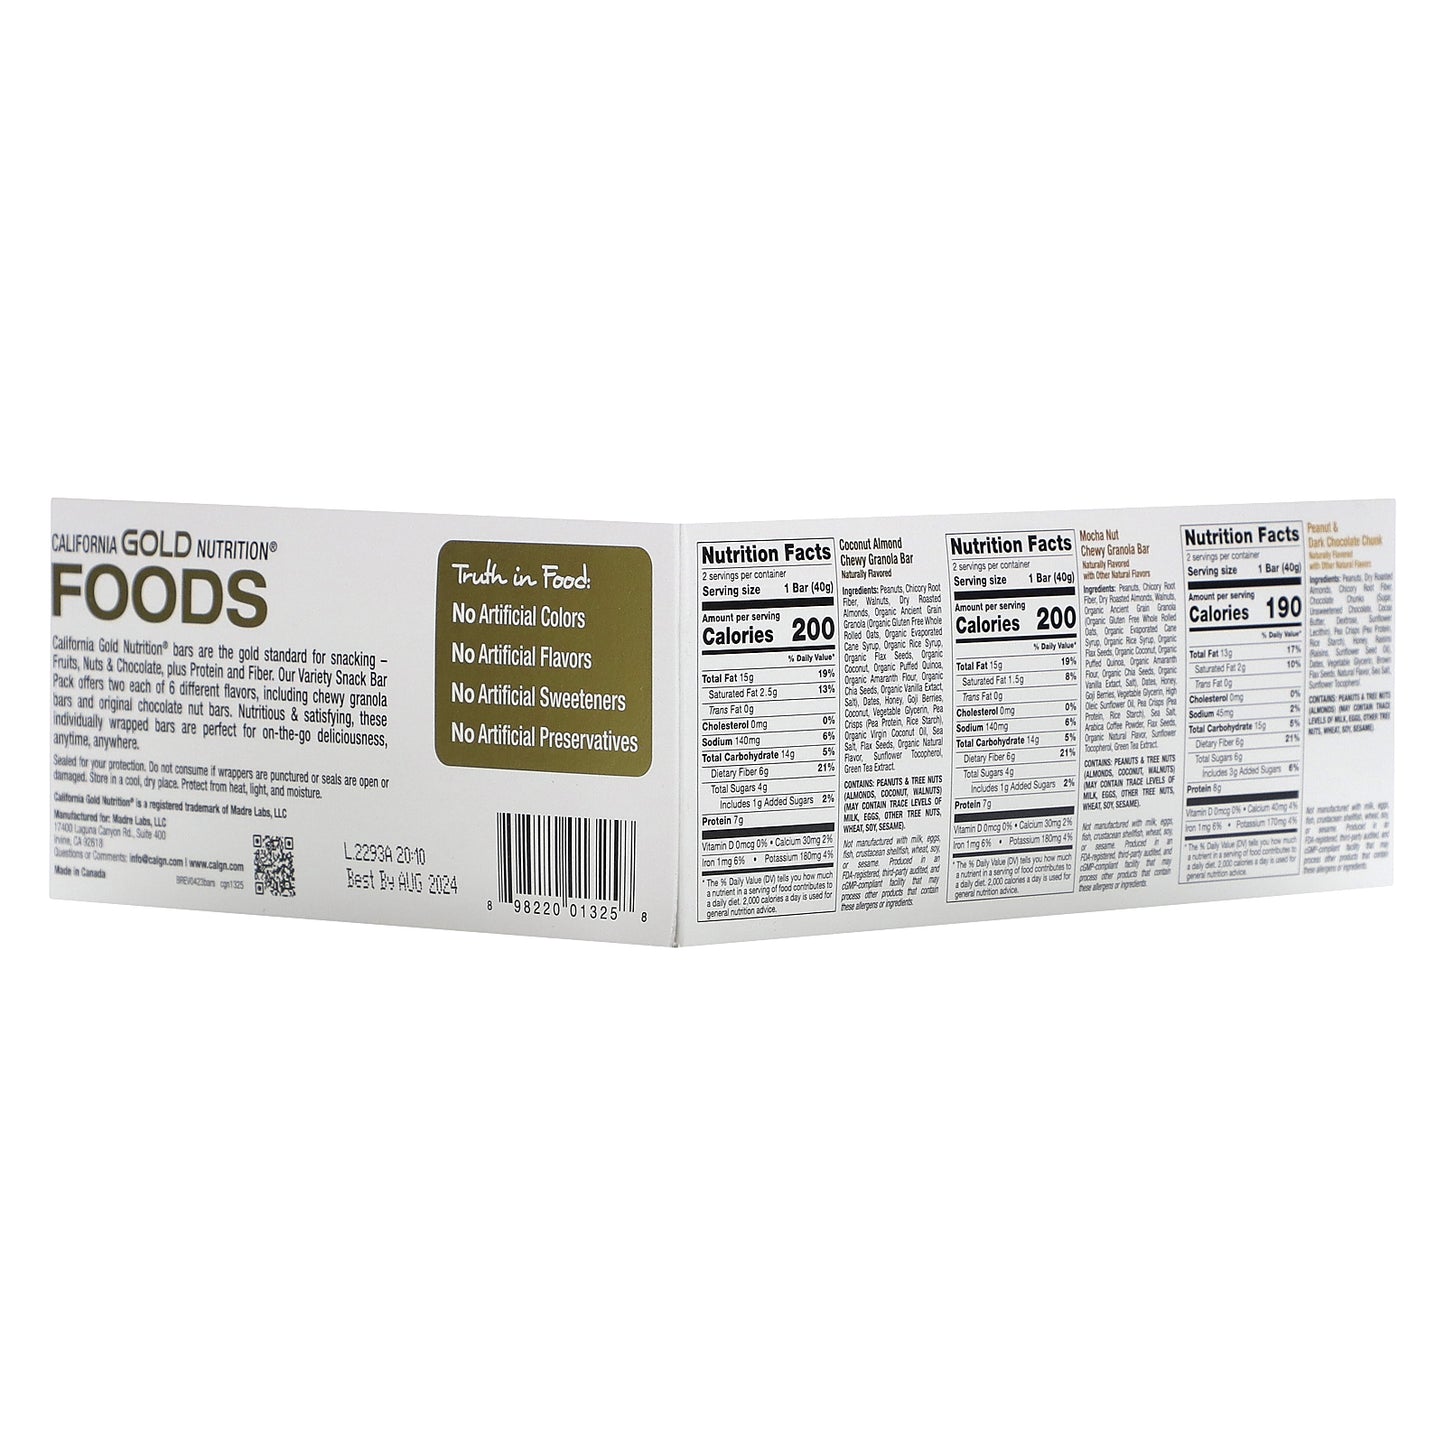 California Gold Nutrition, FOODS - Variety Pack Snack Bars, 12 Bars, 1.4 oz (40 g) Each